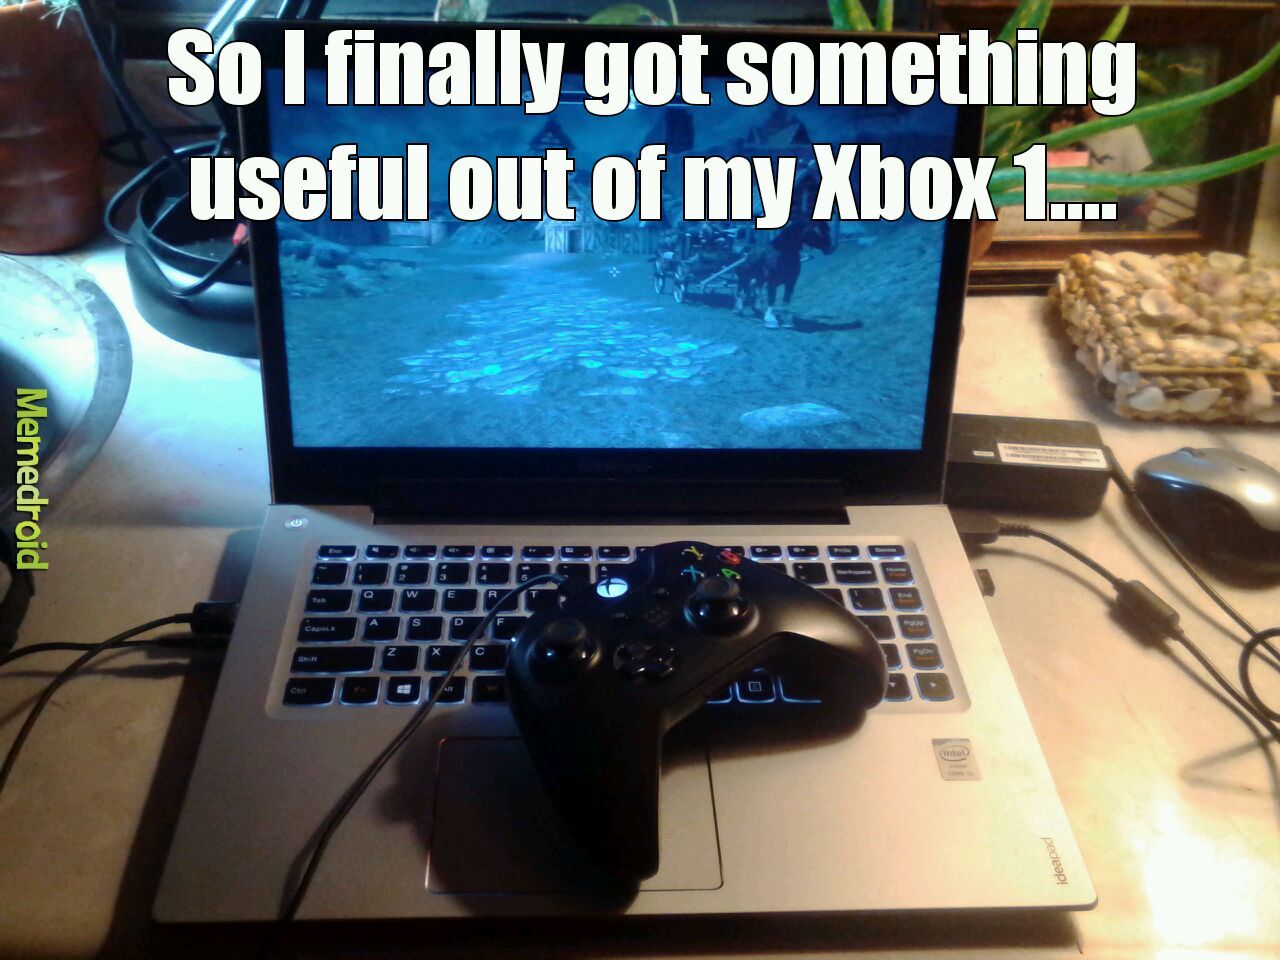 Skyrim on PC is awesome! - meme